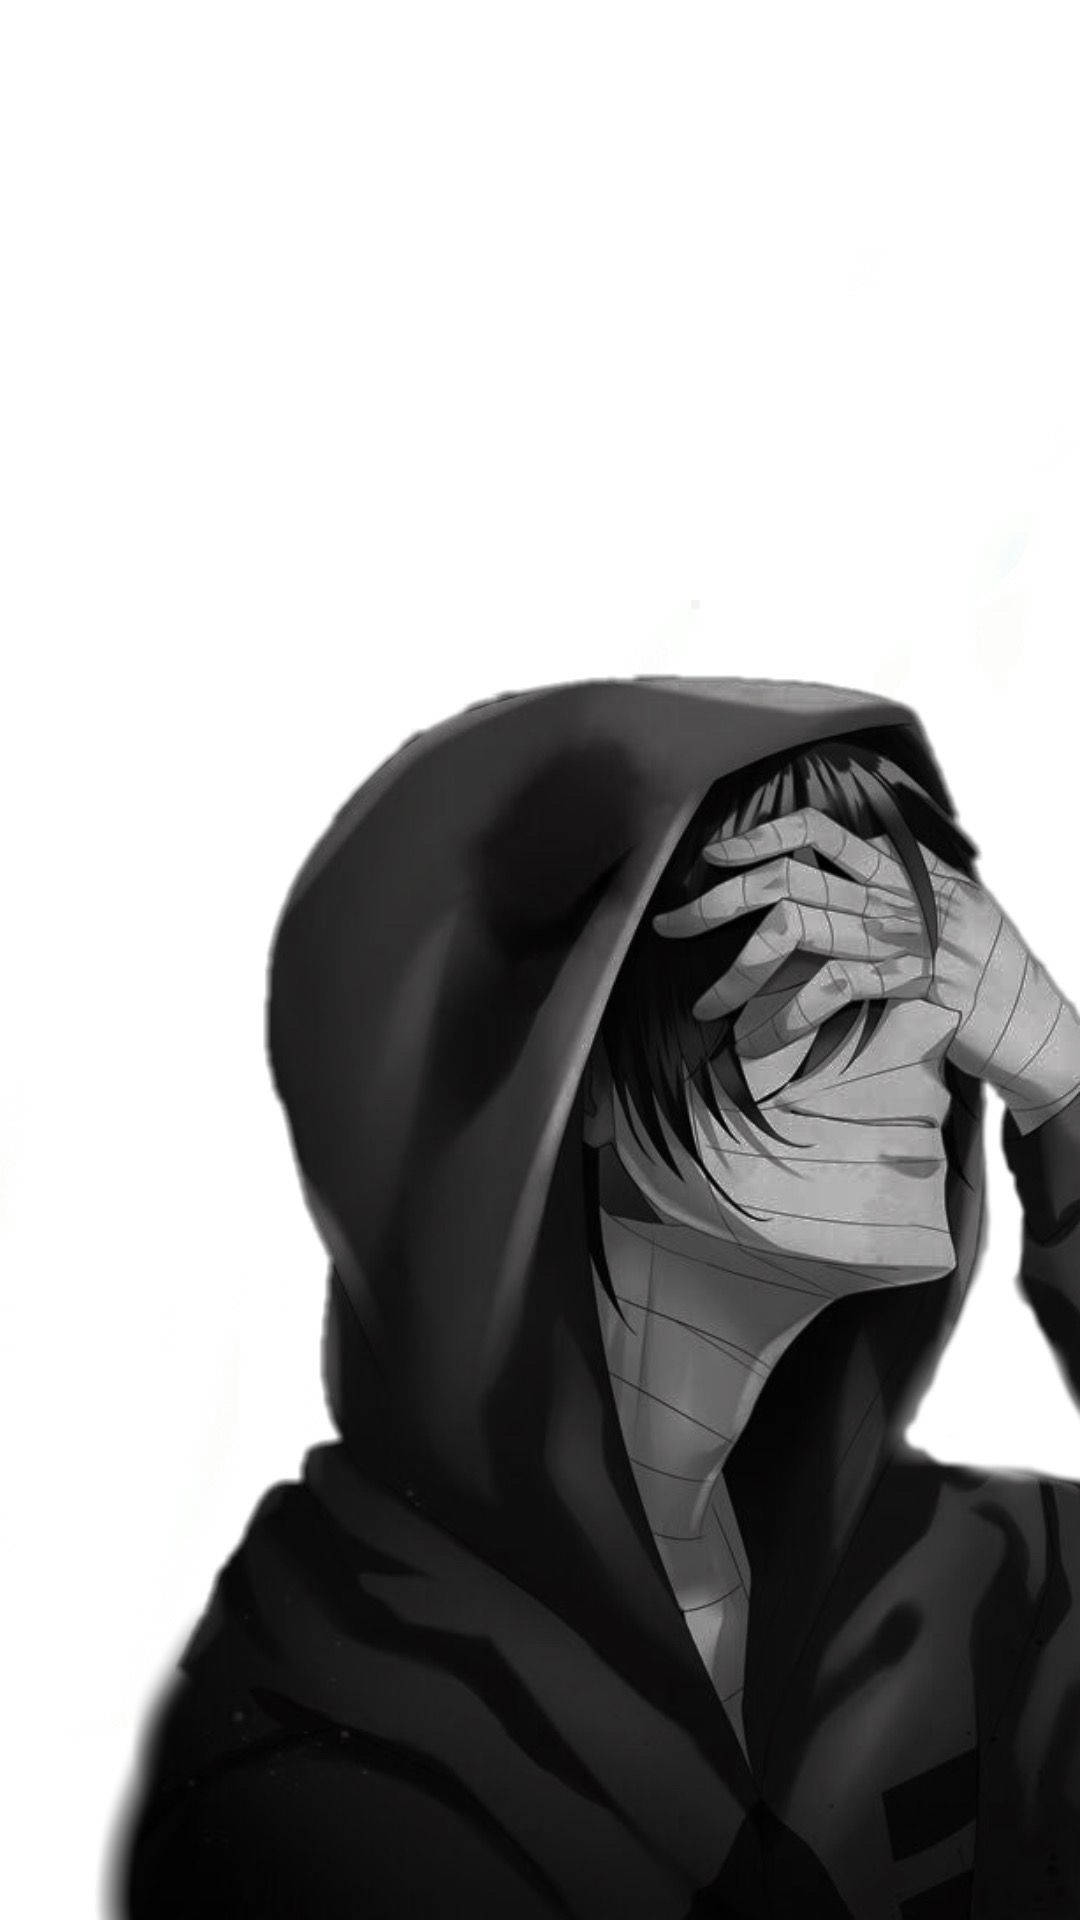 Anime Guy Render By Xdarkivyx On Deviantart  Black And White Anime PNG  Image  Transparent PNG Free Download on SeekPNG